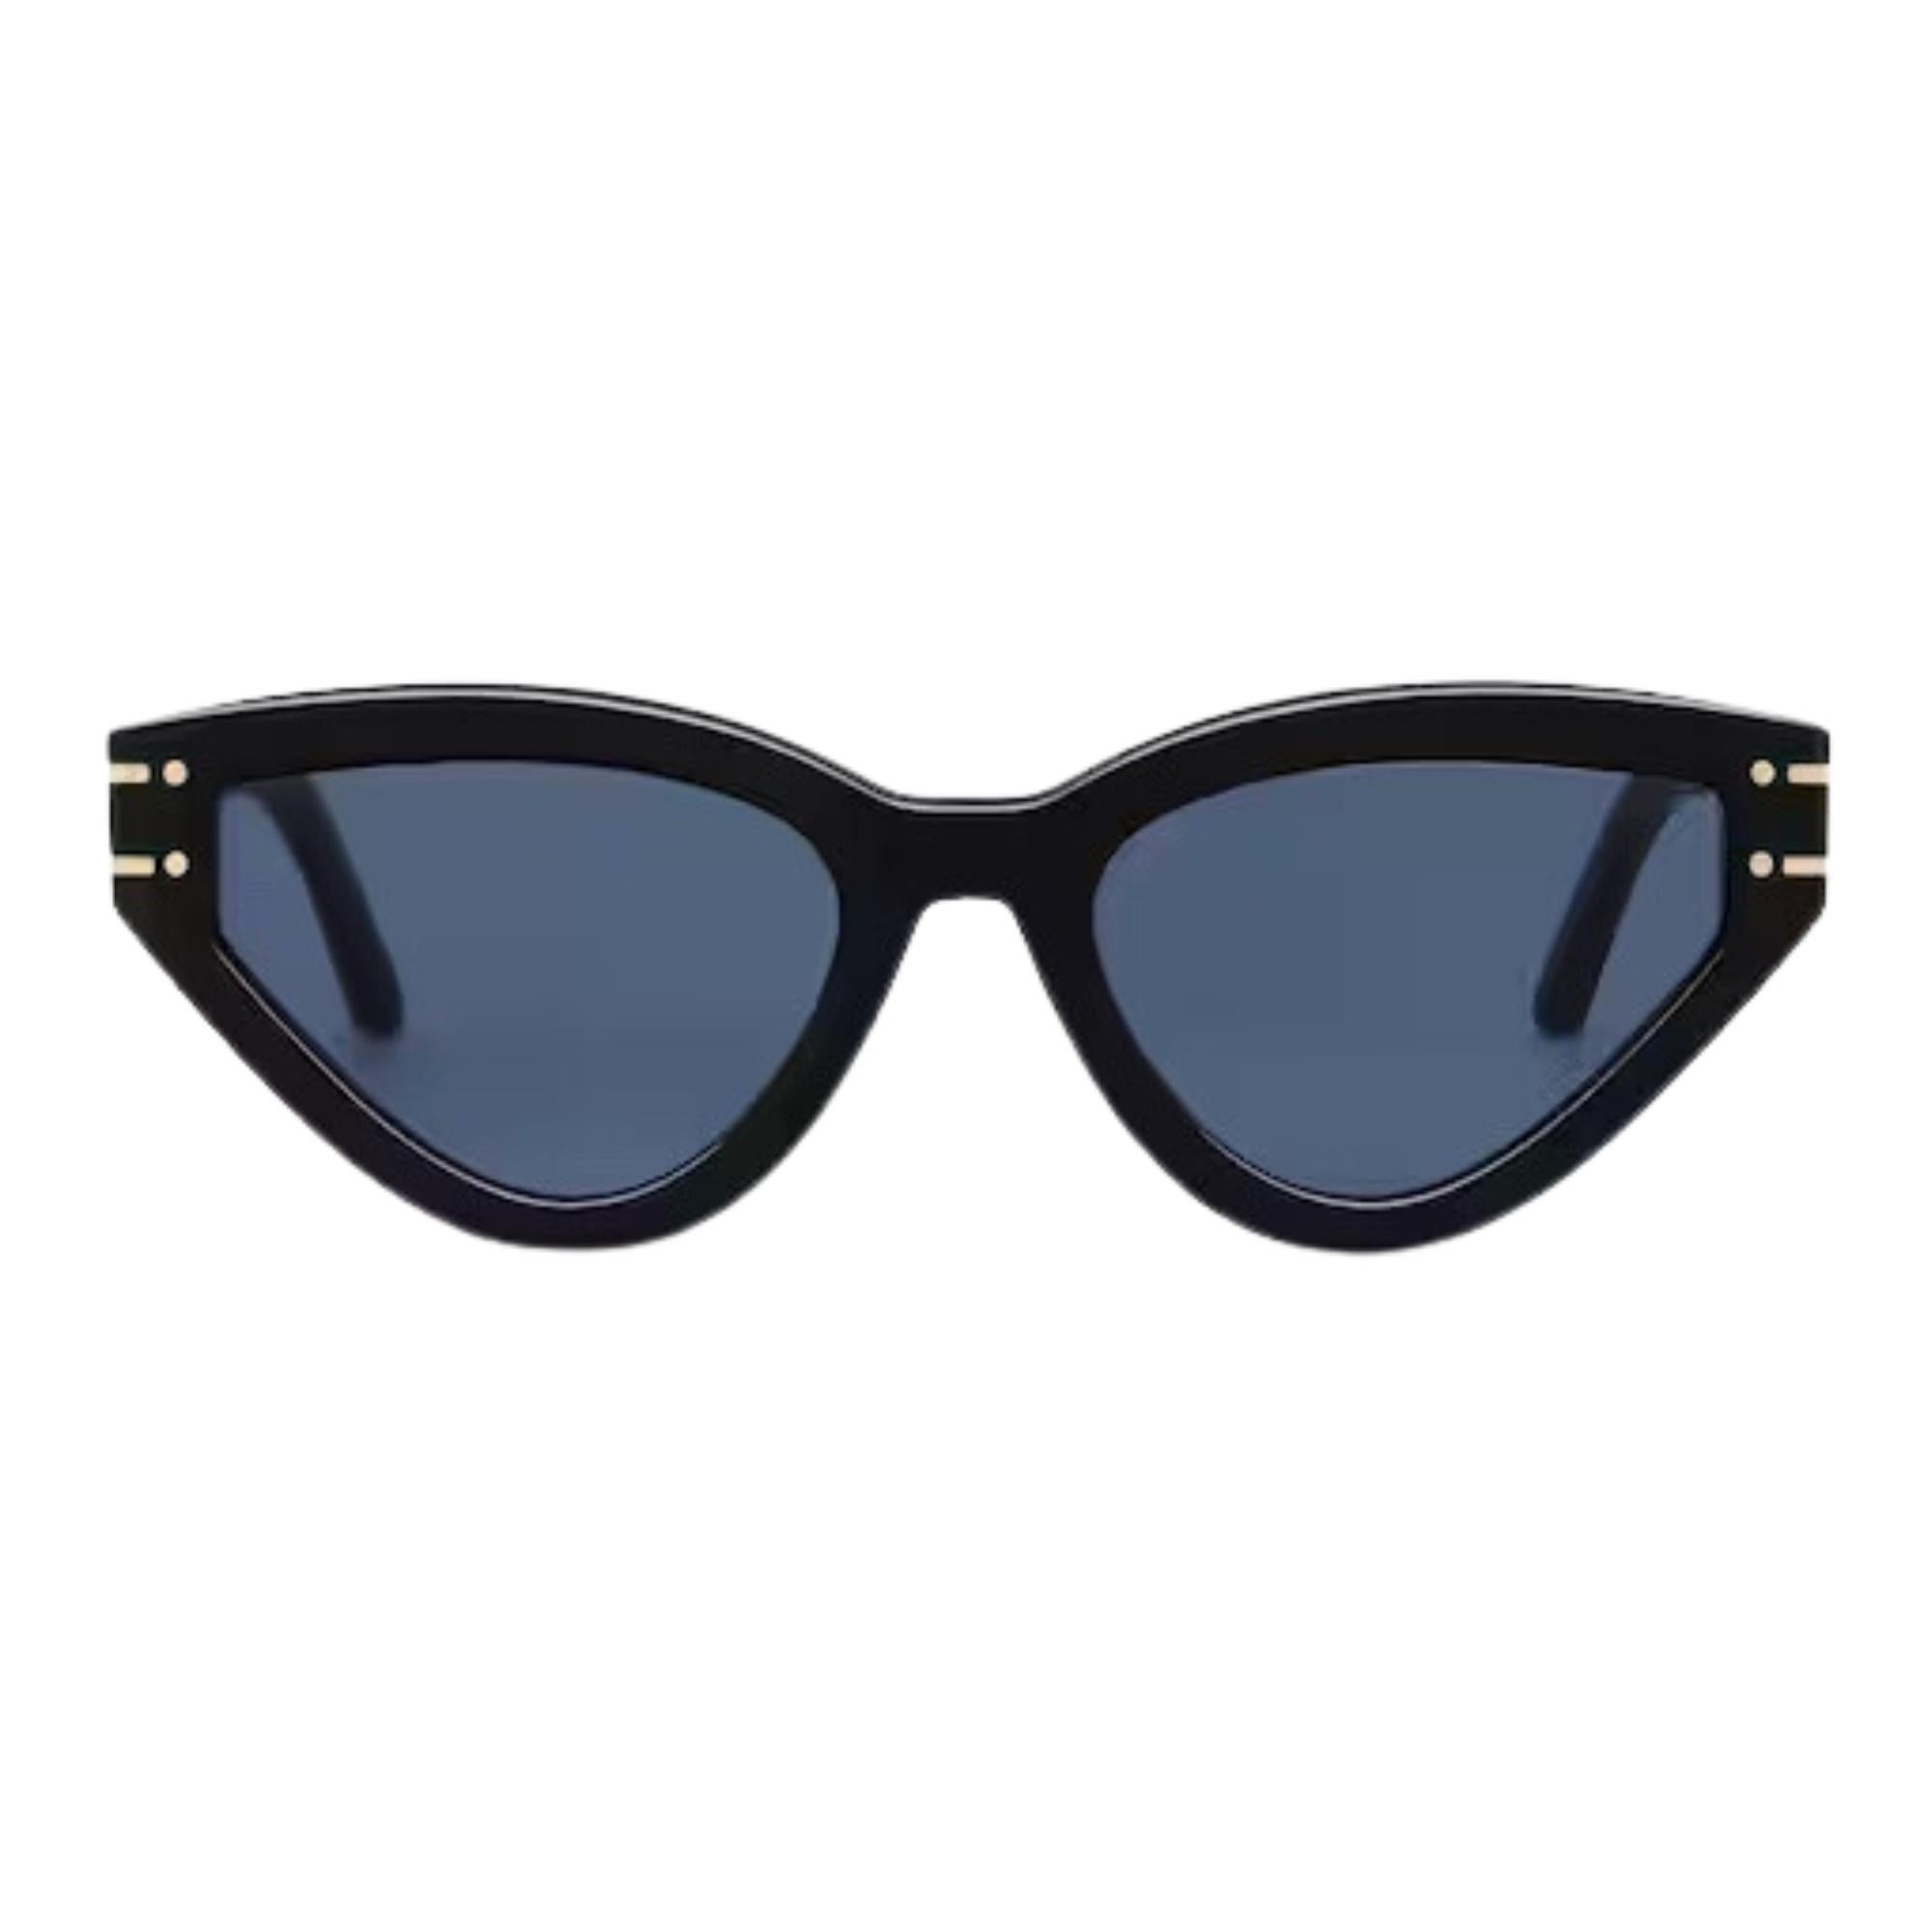 The DiorSignature B2U sunglasses are a valuable addition to the now iconic House line. The black acetate butterfly-shaped frame showcases 'CHRISTIAN DIOR PARIS' signature temples, further embellished with gold-finish metal lines that end at the